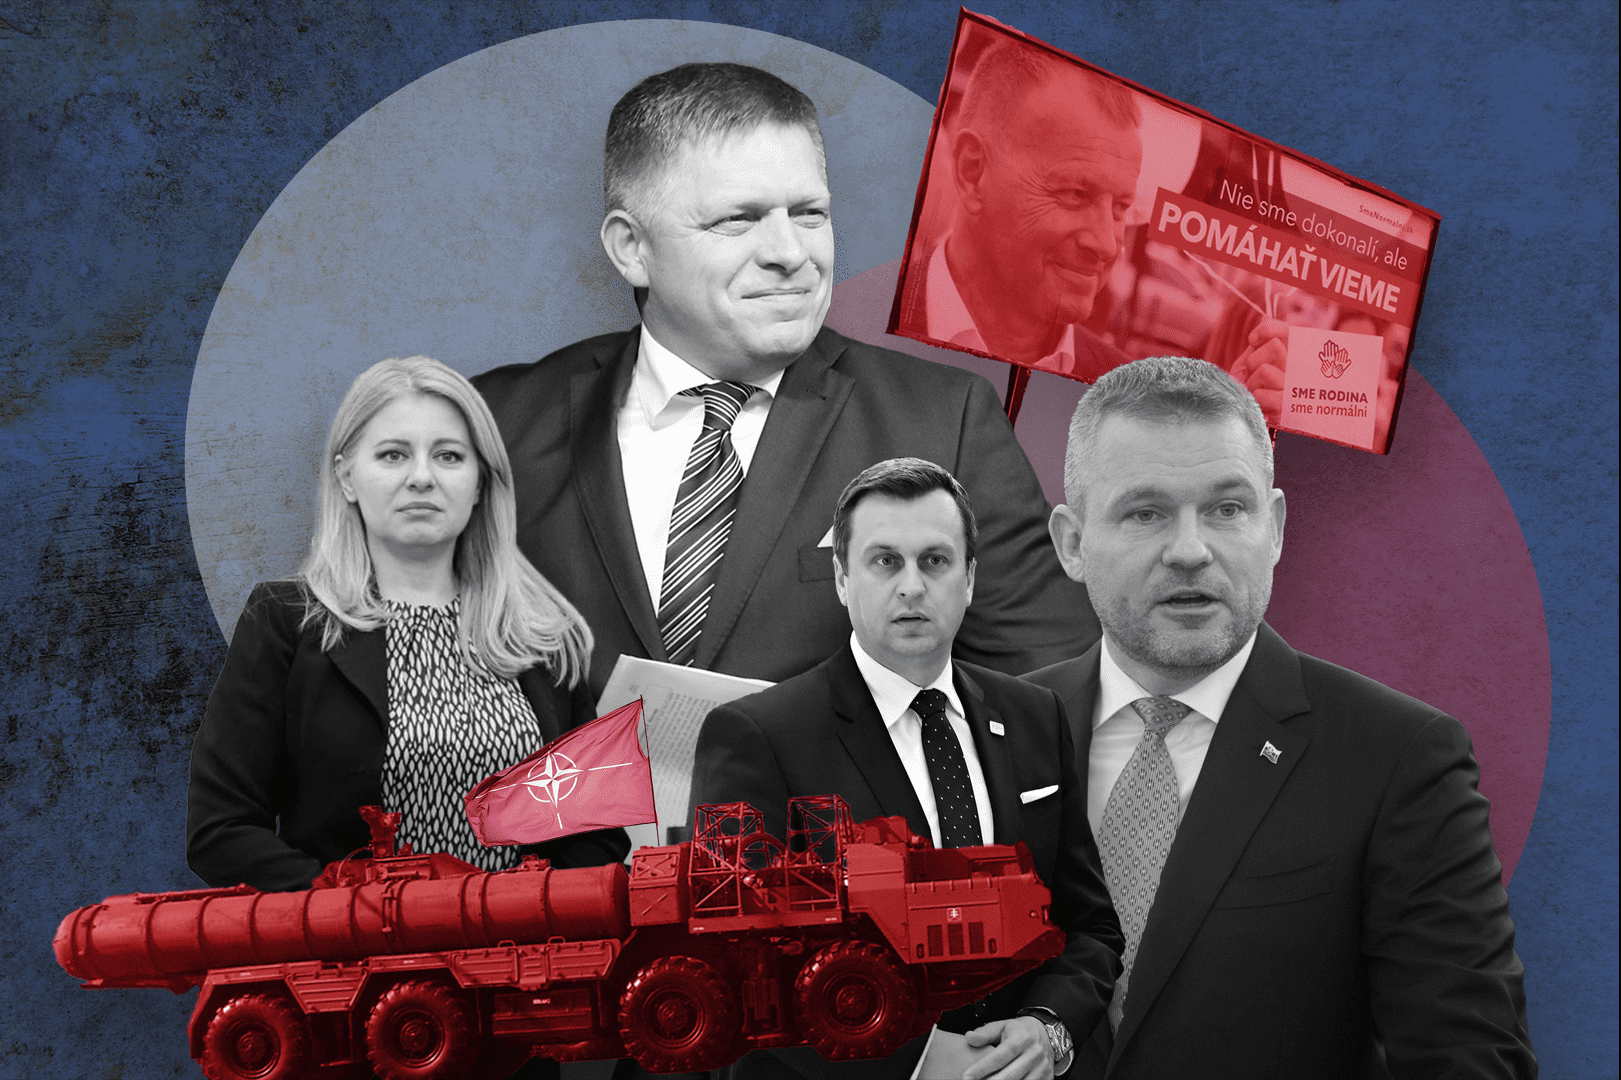 Fico is Back, but Illiberalism in Slovakia Faces Headwinds